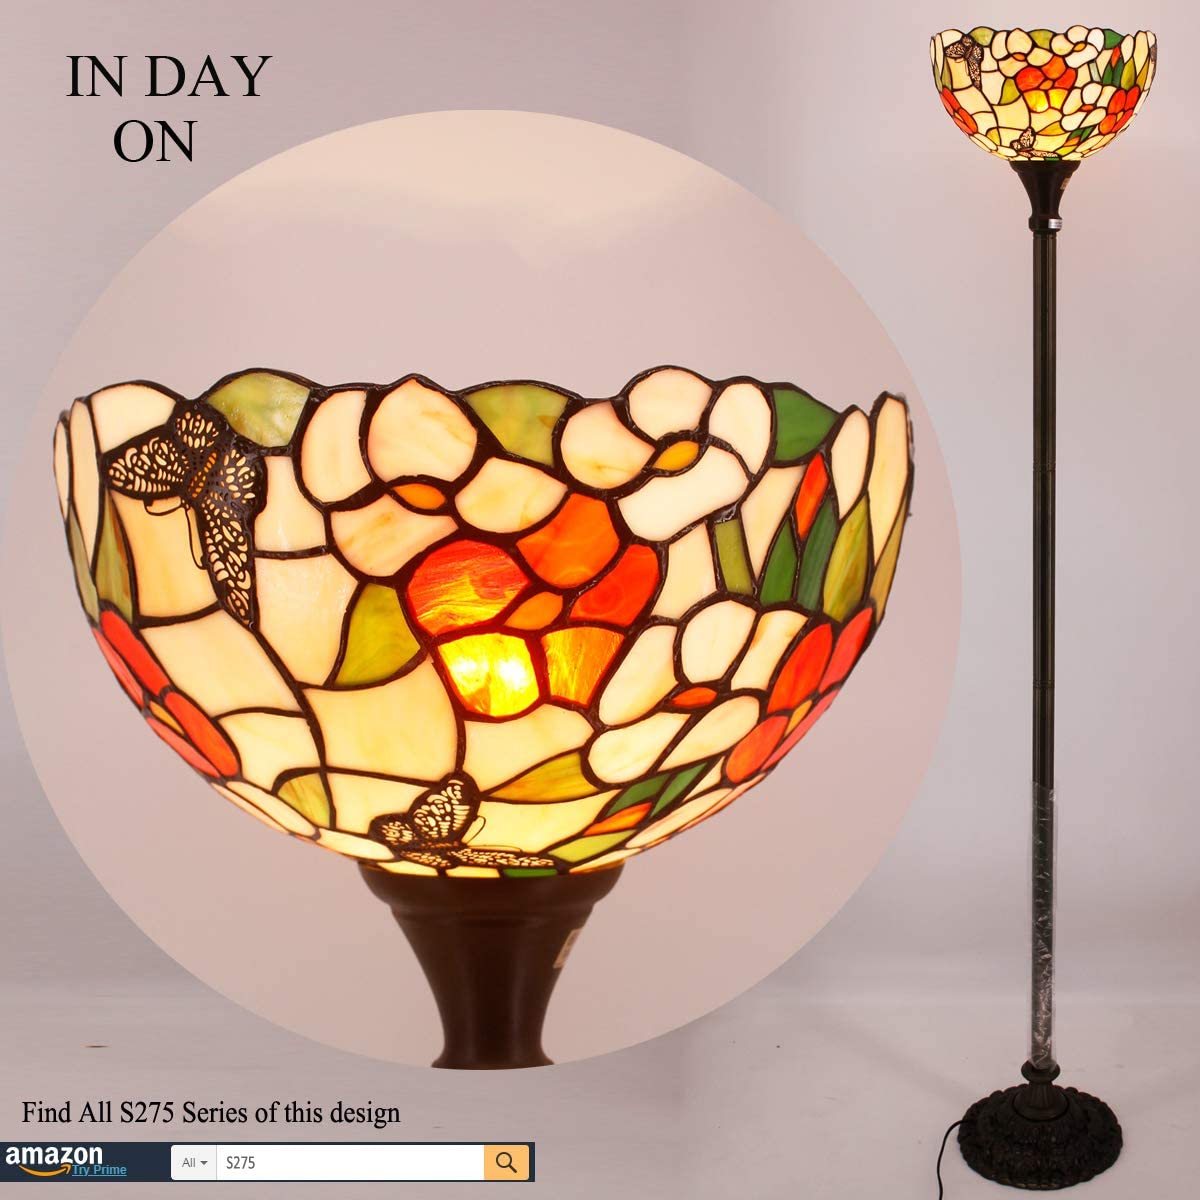 BBNBDMZ bzfwm  Floor Lamp Butterfly Amber Stained Glass Light 12X12X66 Inches Pole Torchiere Standing Corner Torch Uplight Decor Bedroom Living Room  Office S275 Series